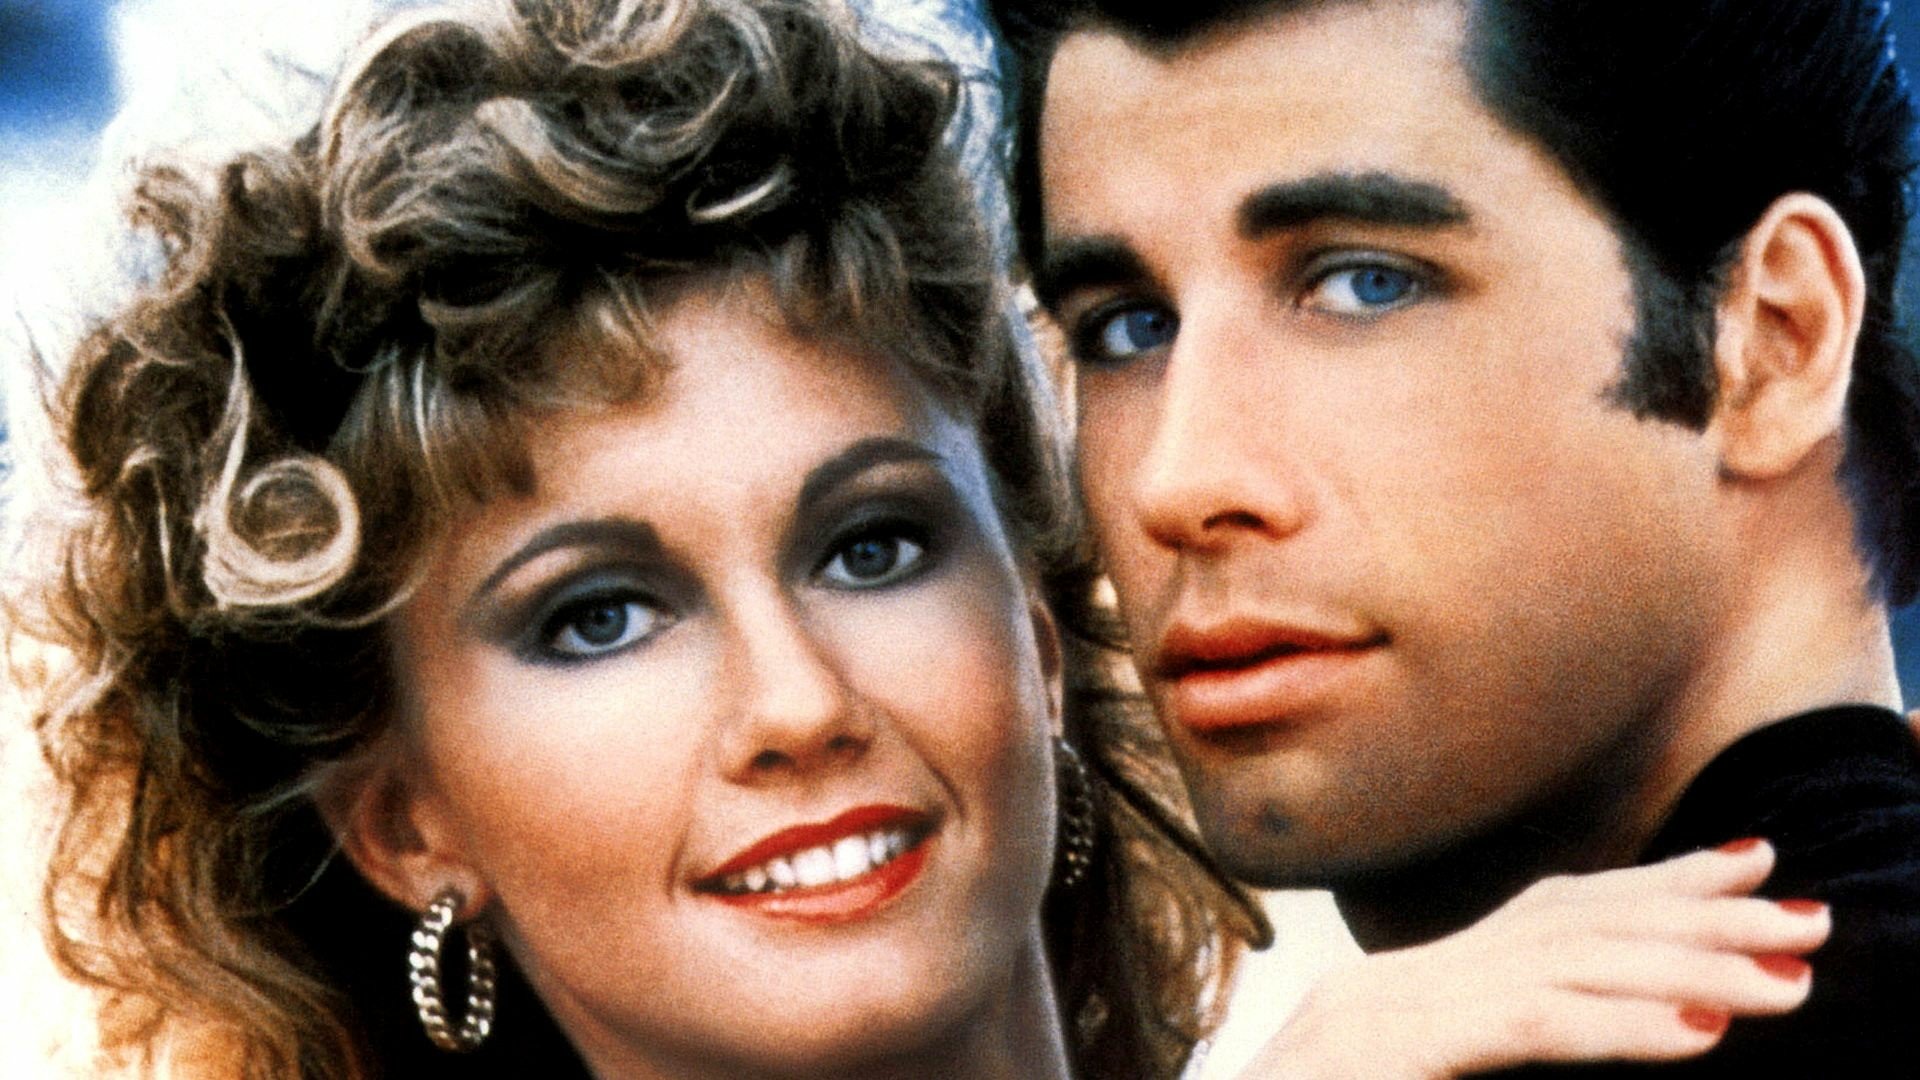 grease Full HD Wallpaper and Background Image 1920x1080 ID467375